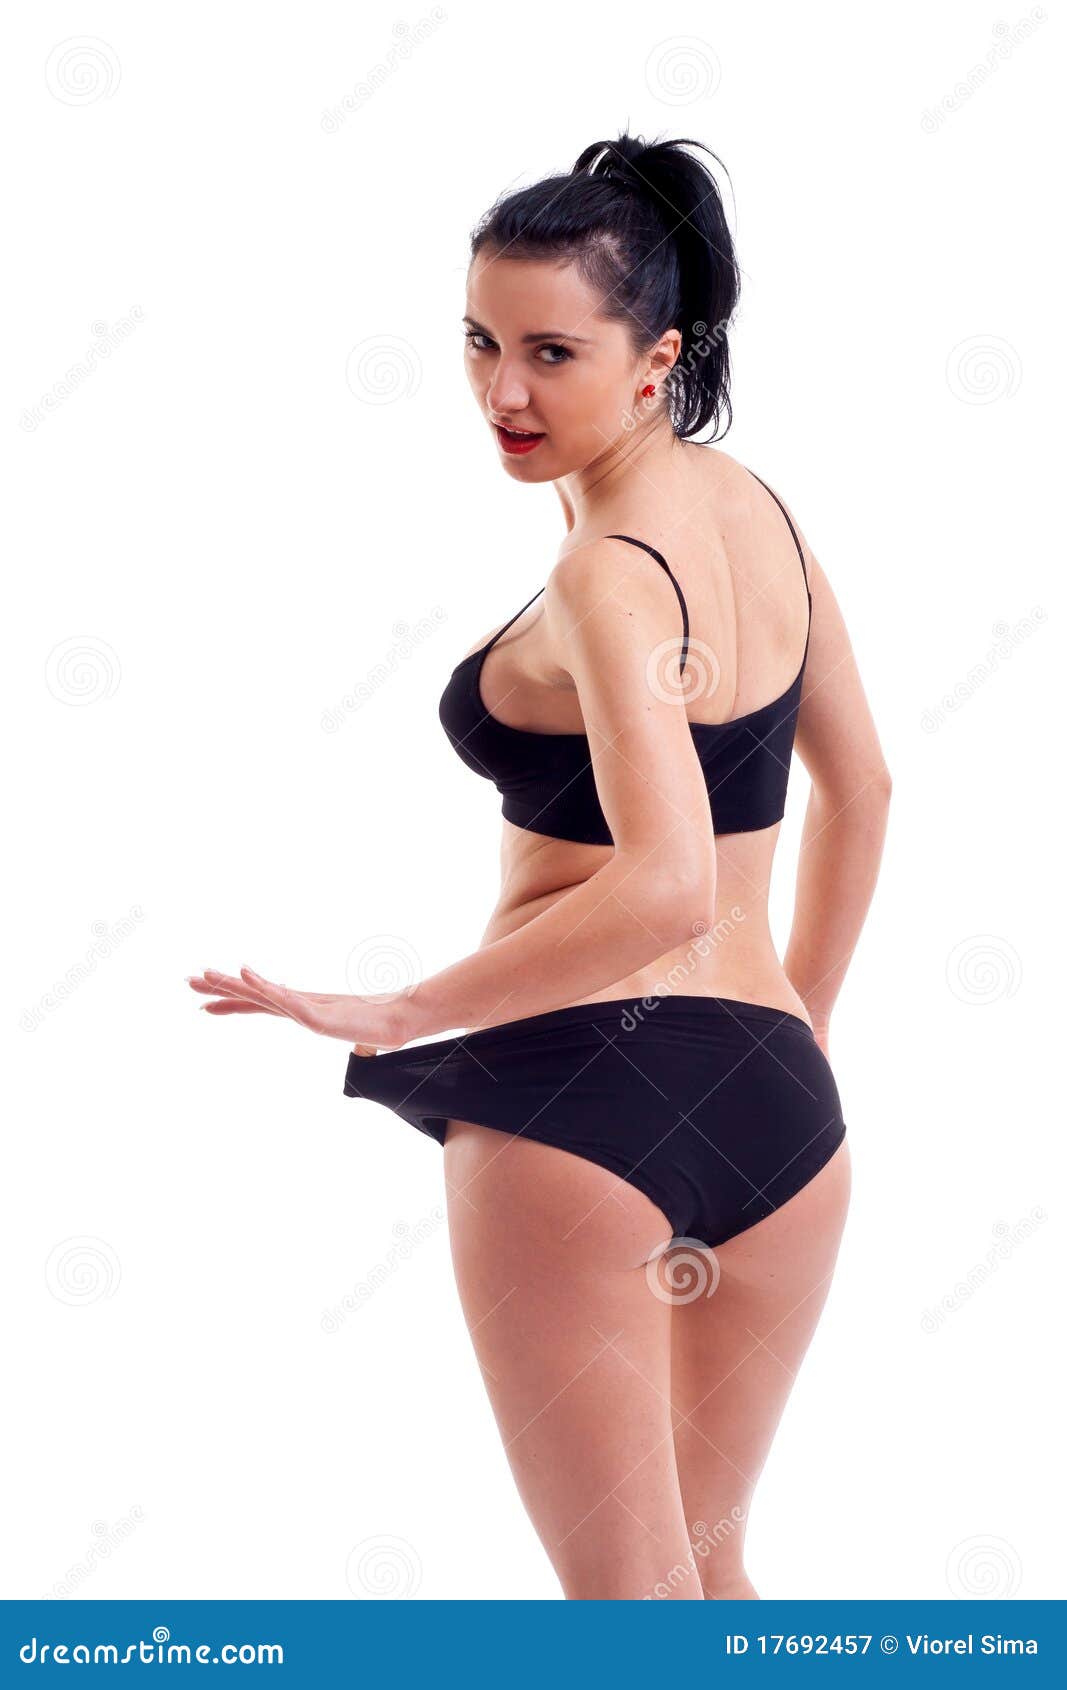 Woman Pulling Her Underwear Stock Image - Image of lady, beauty